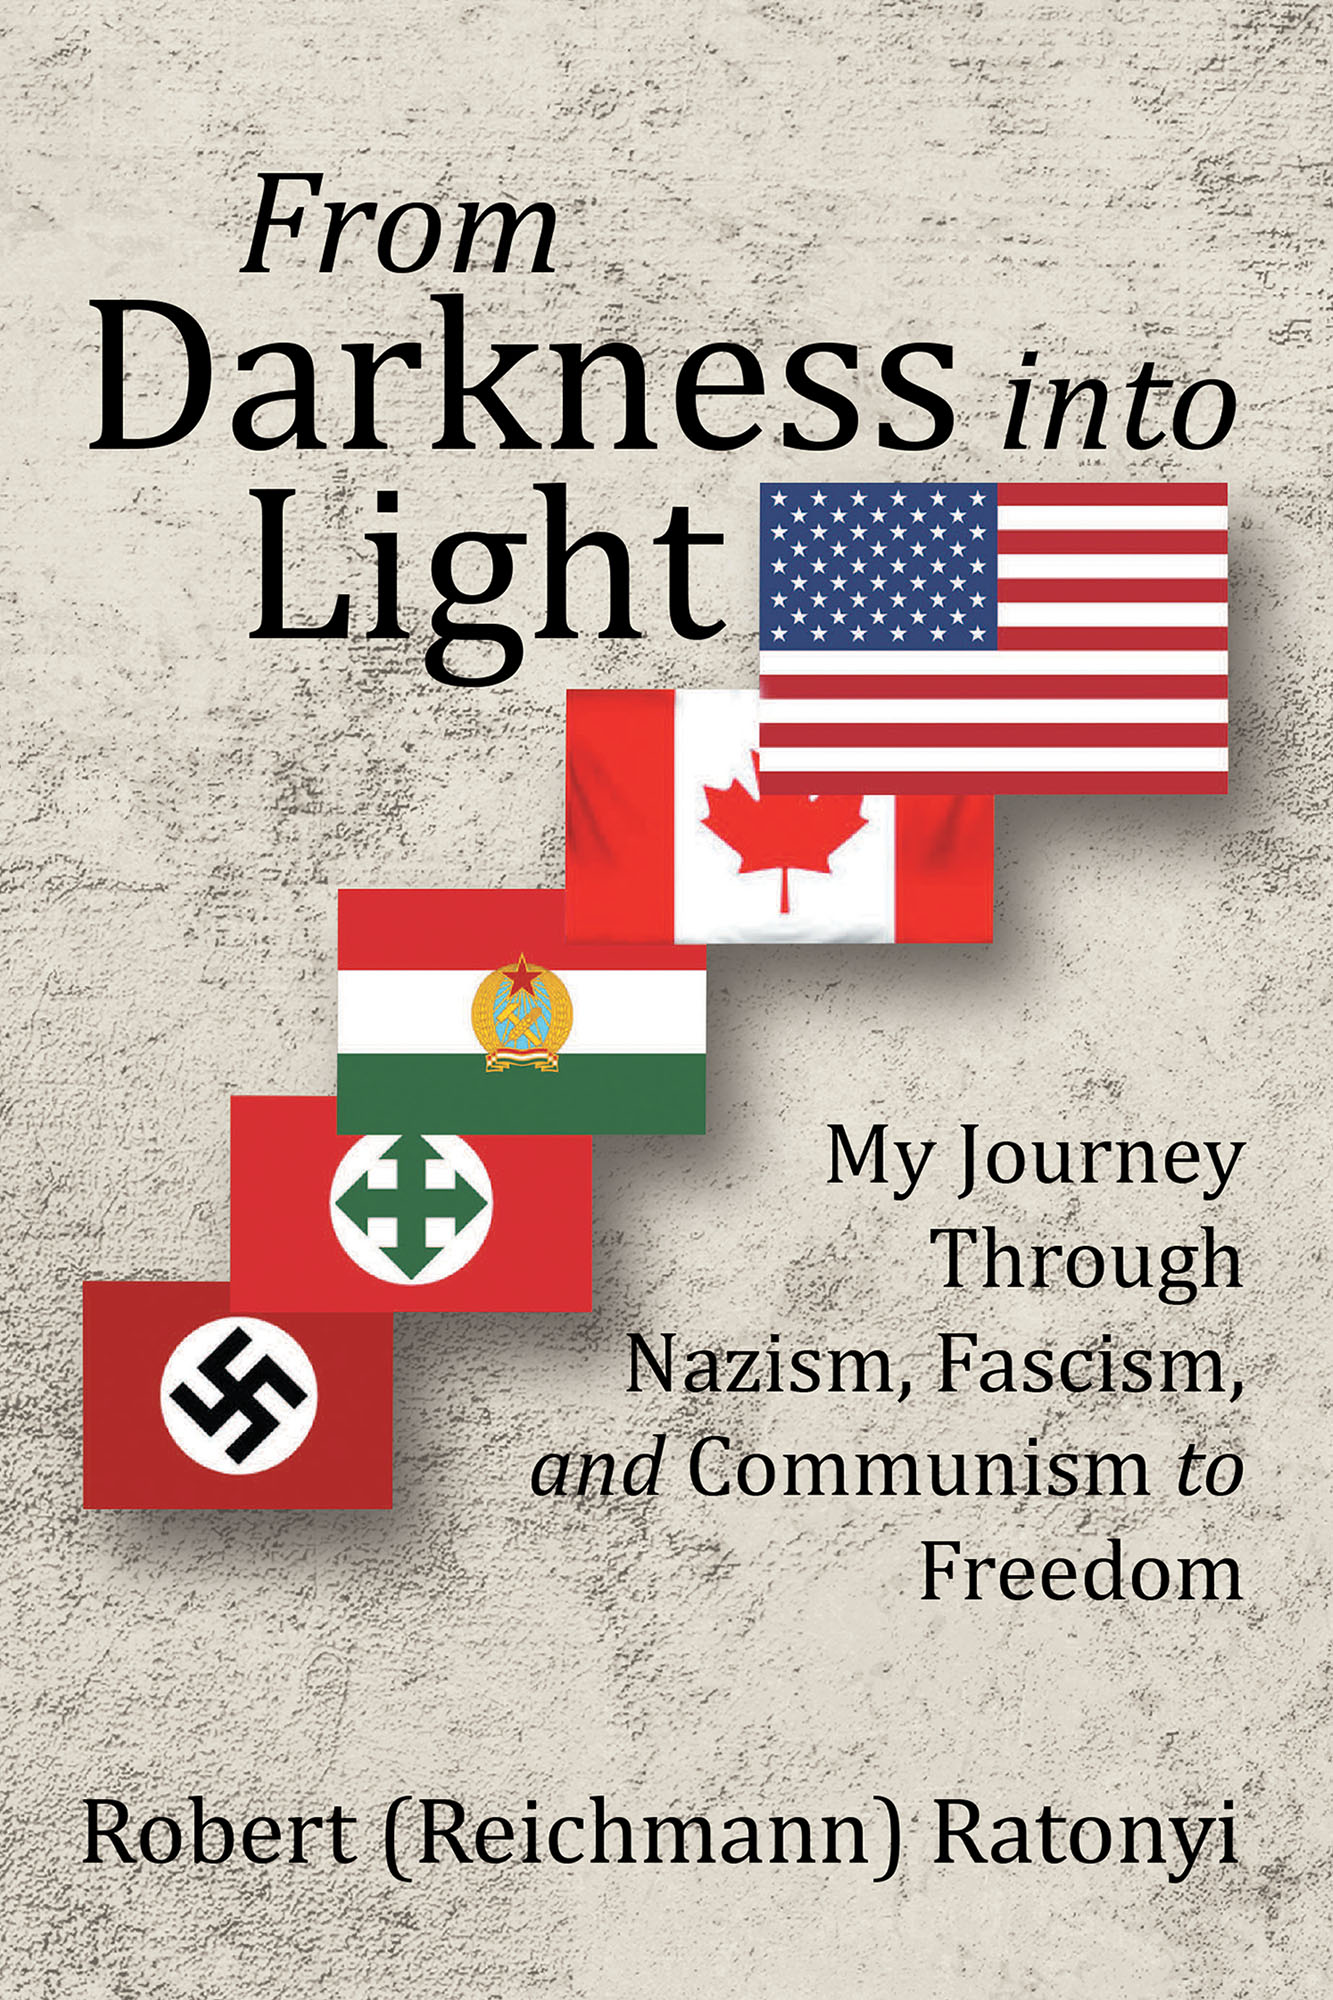 From Darkness into Light Cover Image